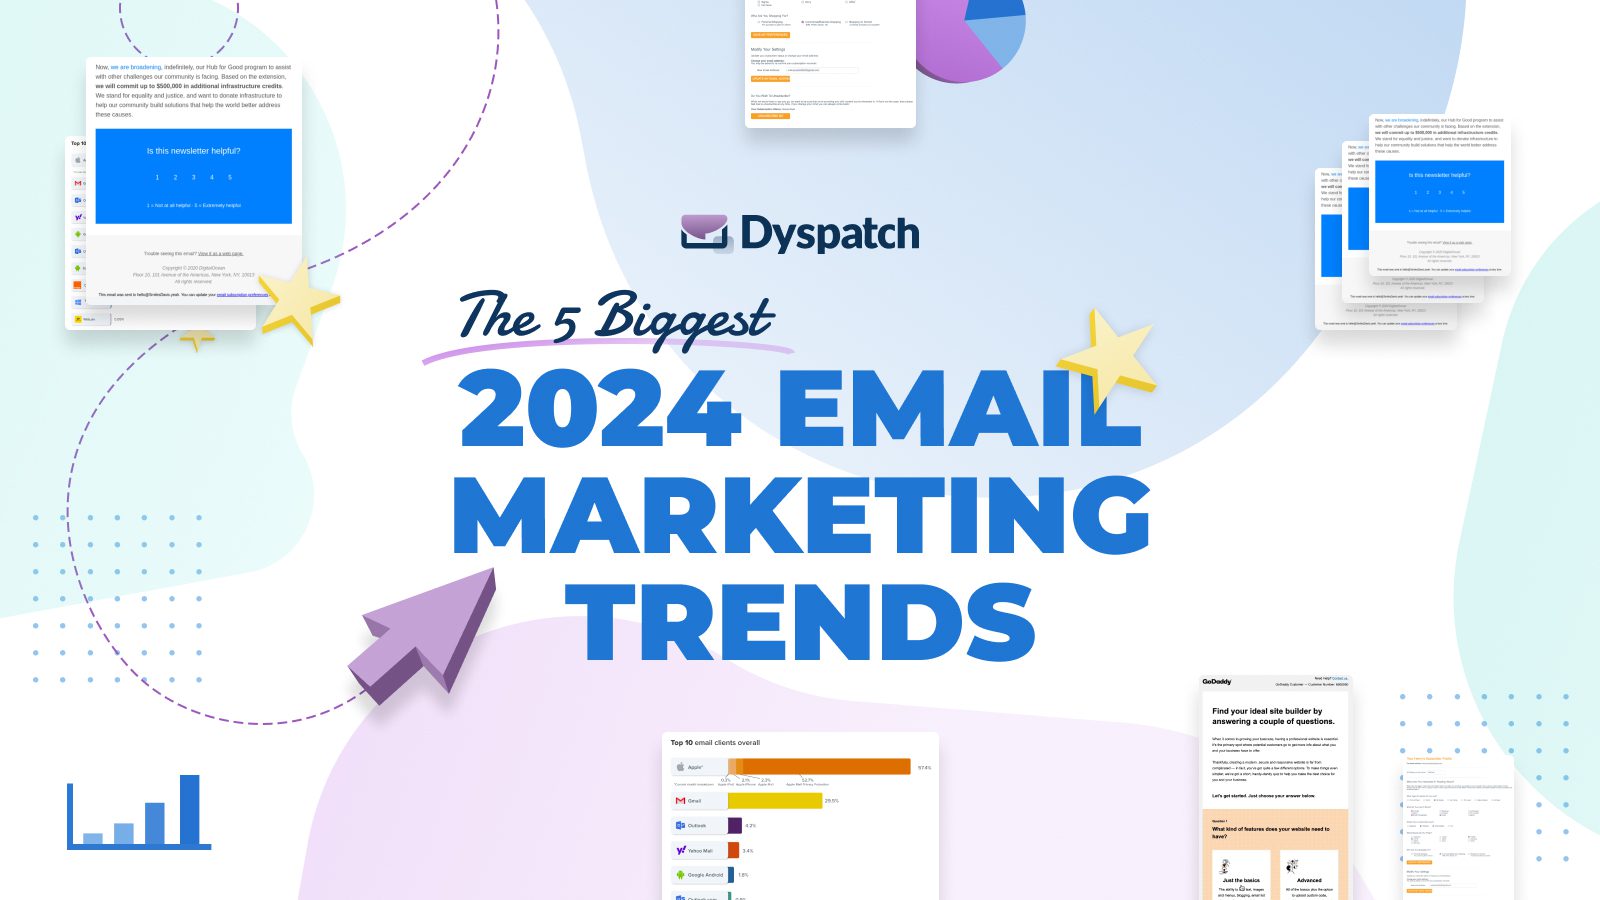 Dyspatch blog - the biggest 2024 email marketing trends